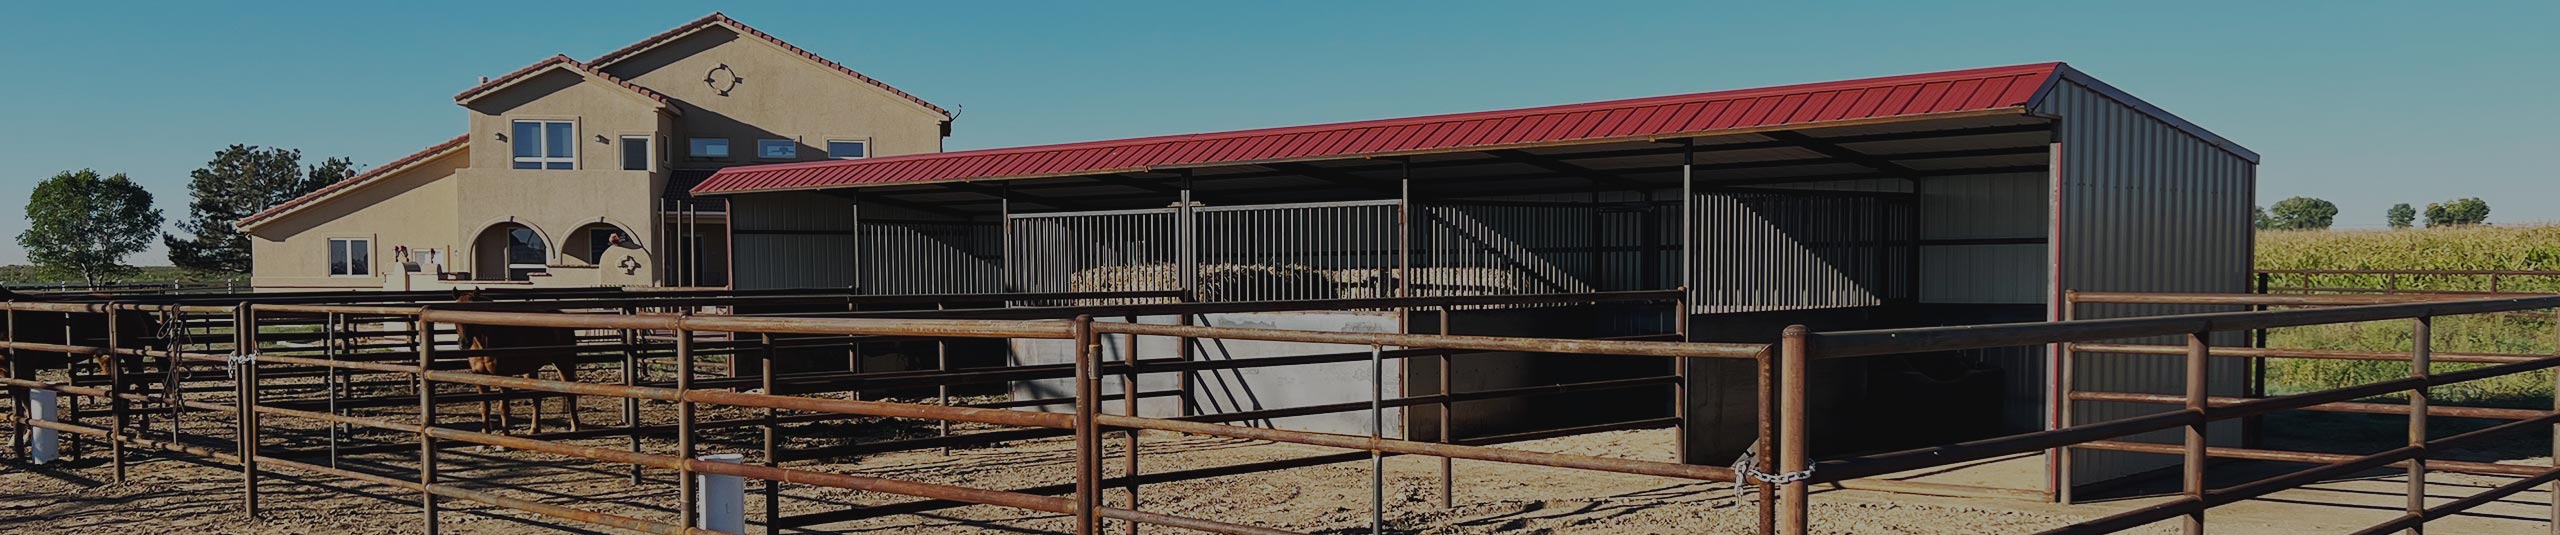 Metal sided portable horse loafing shed with steel pipe fence runs off the front